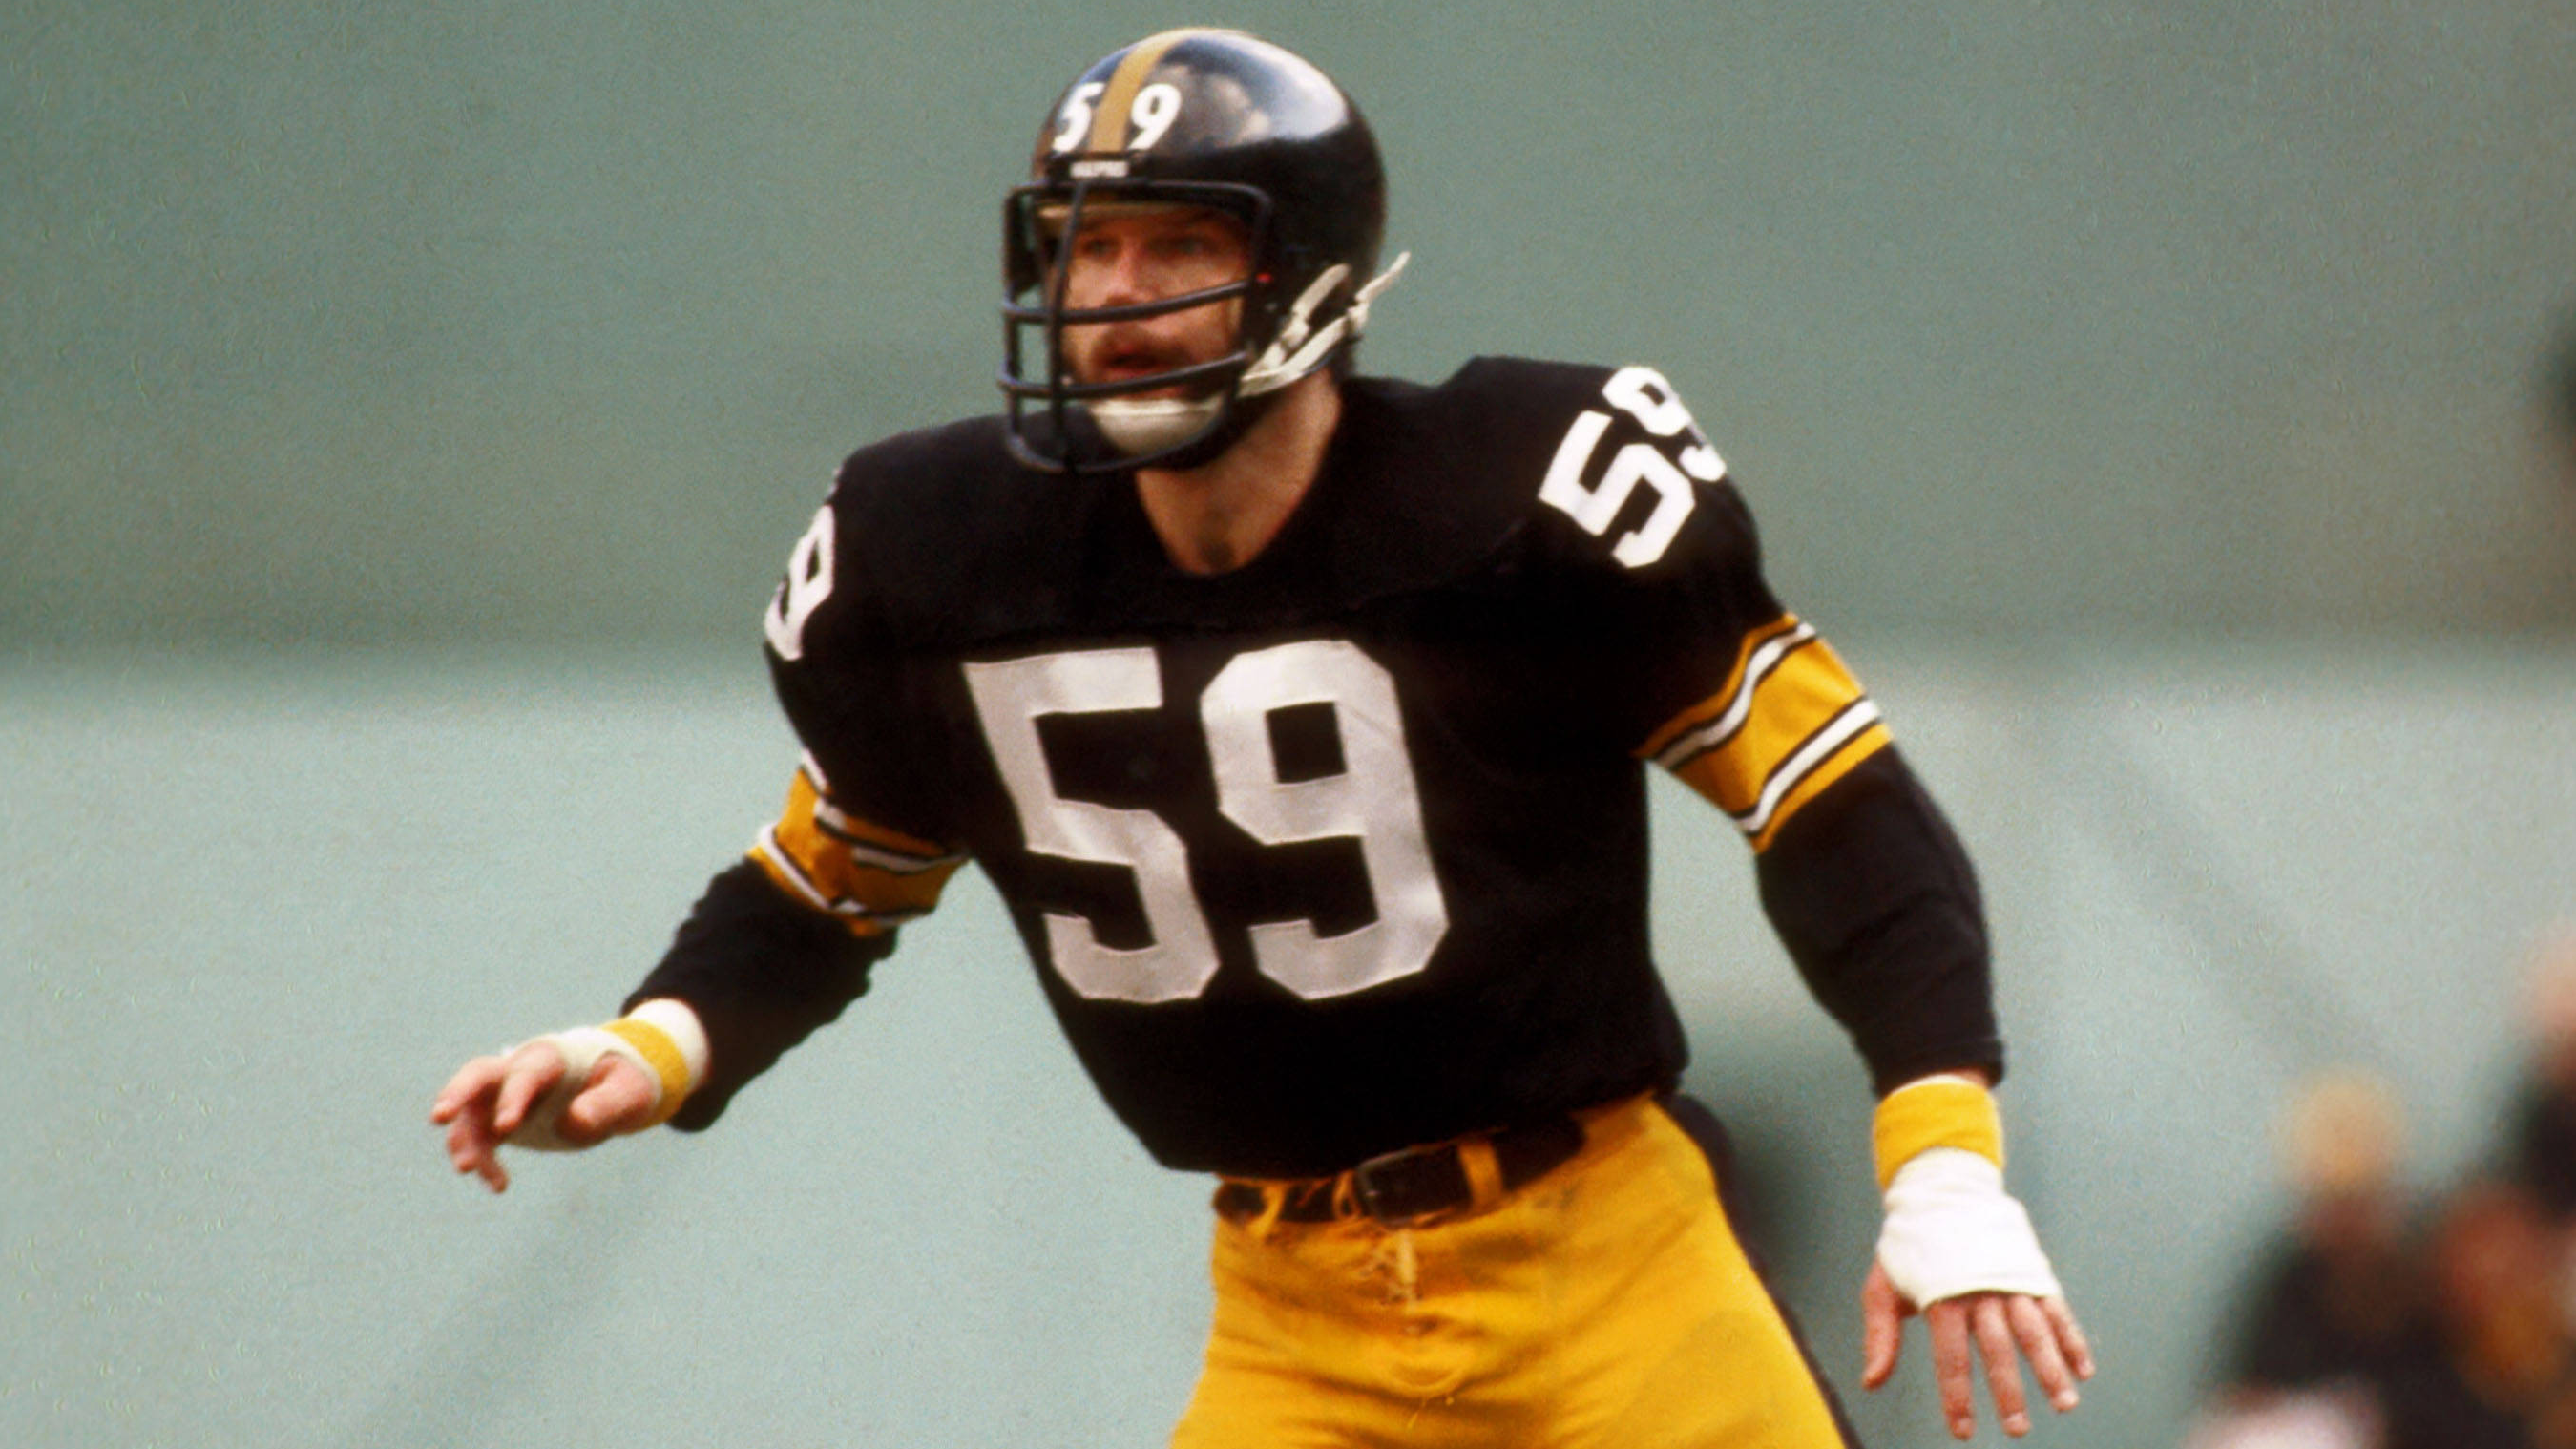 <strong>59: Jack Ham</strong><br>Team: Pittsburgh Steelers<br>Position: Linebacker<br>Erfolge: Pro Football Hall of Famer, viermaliger Super-Bowl-Champion, NFL Defensive Player of the Year 1976, sechsmaliger First Team All-Pro, achtmaliger Pro Bowler<br>Honorable Mention: Luke Kuechly